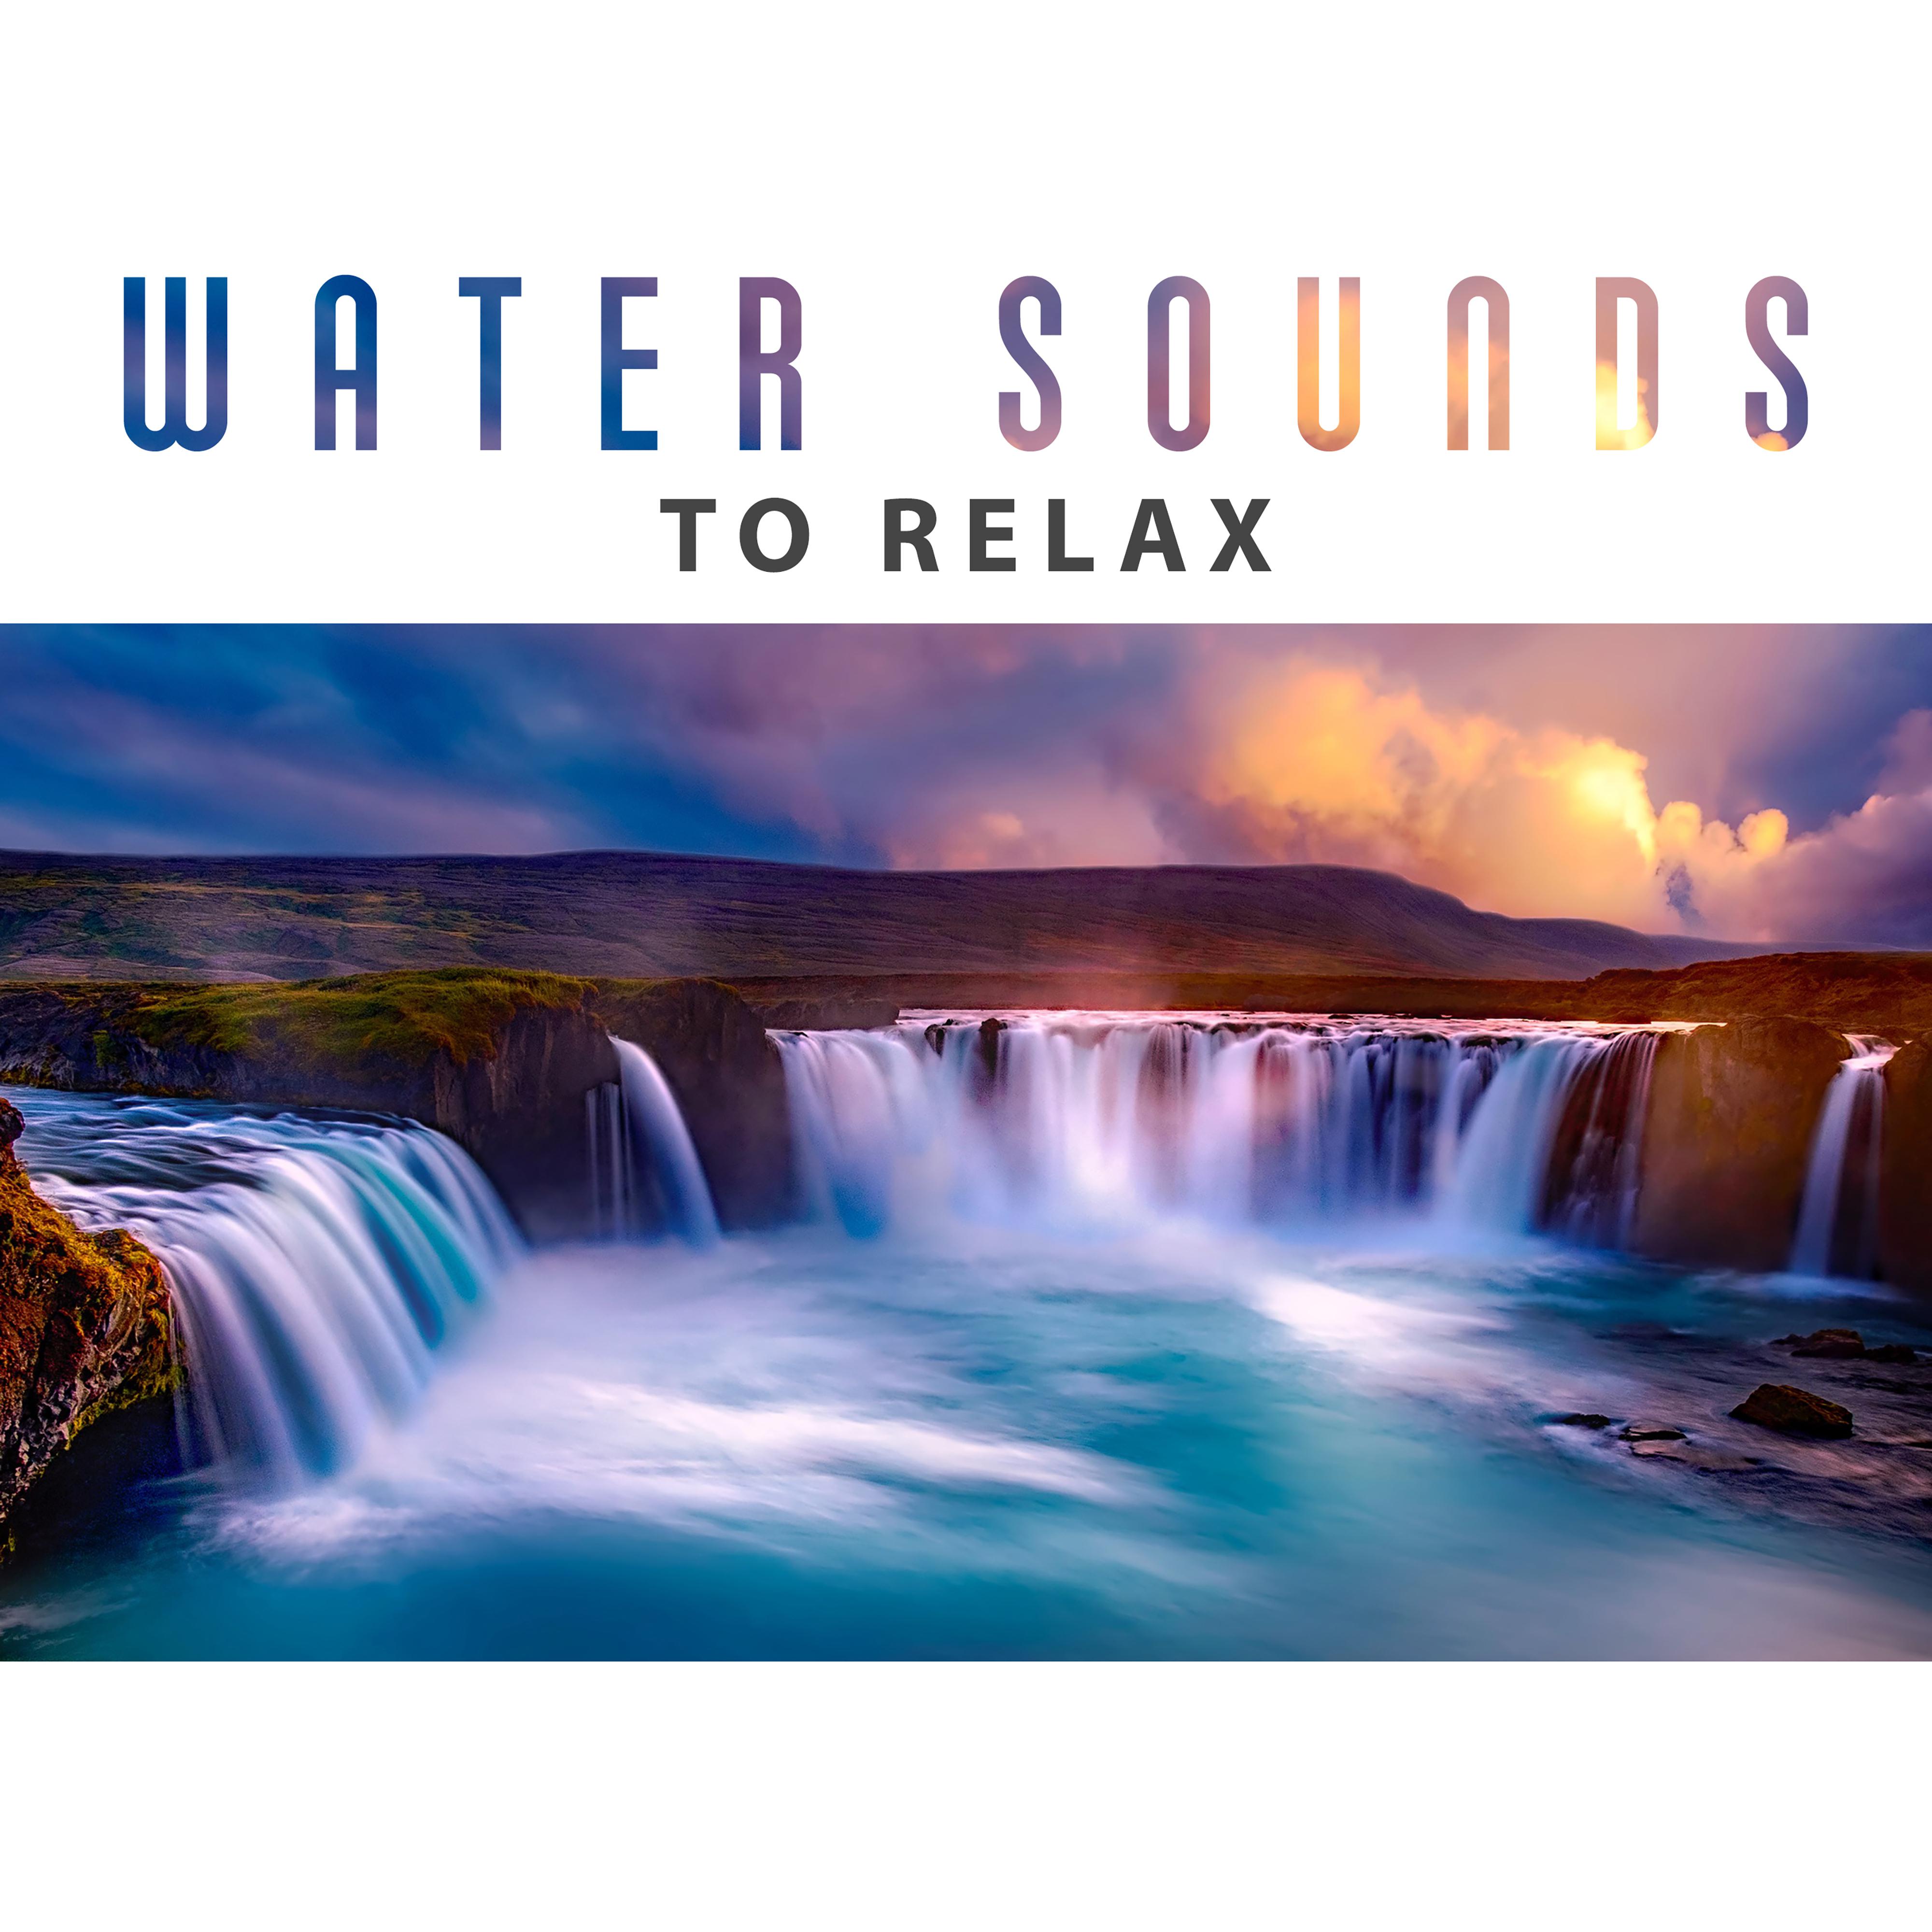 Water Sounds to Relax  Calm Sea, Ocean Waves, Healing Therapy, Sounds to Calm Down, Peaceful Spirit